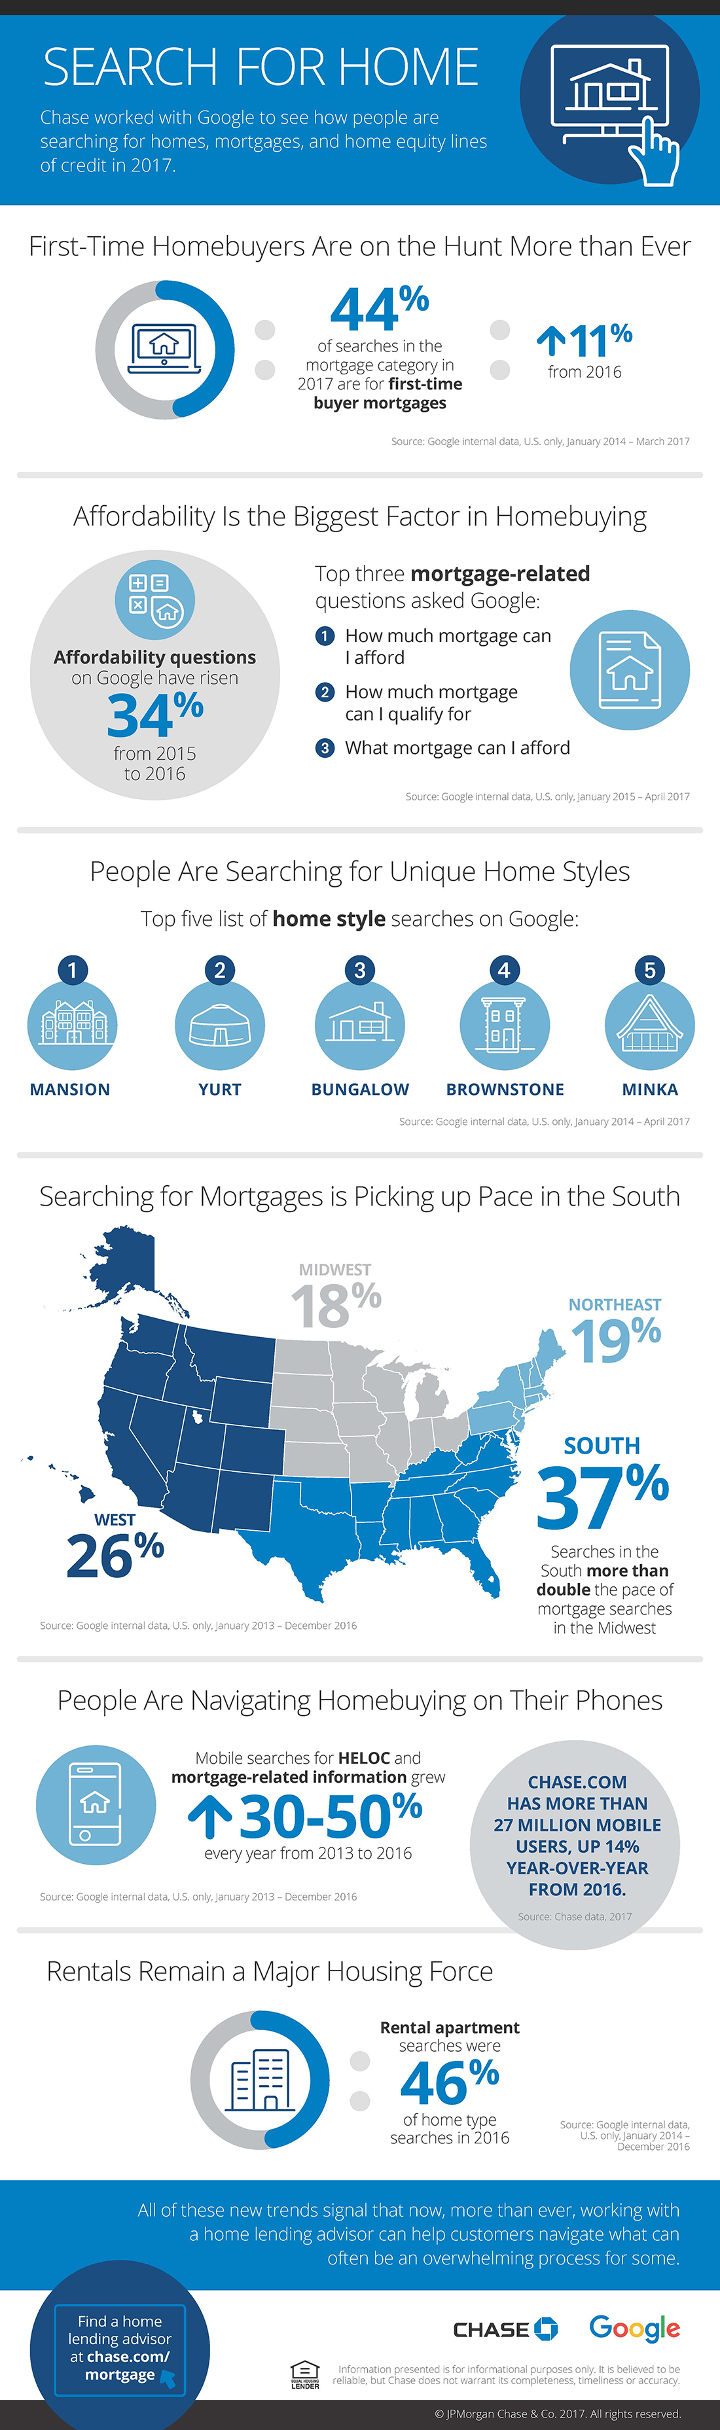 chase google search for home infographic